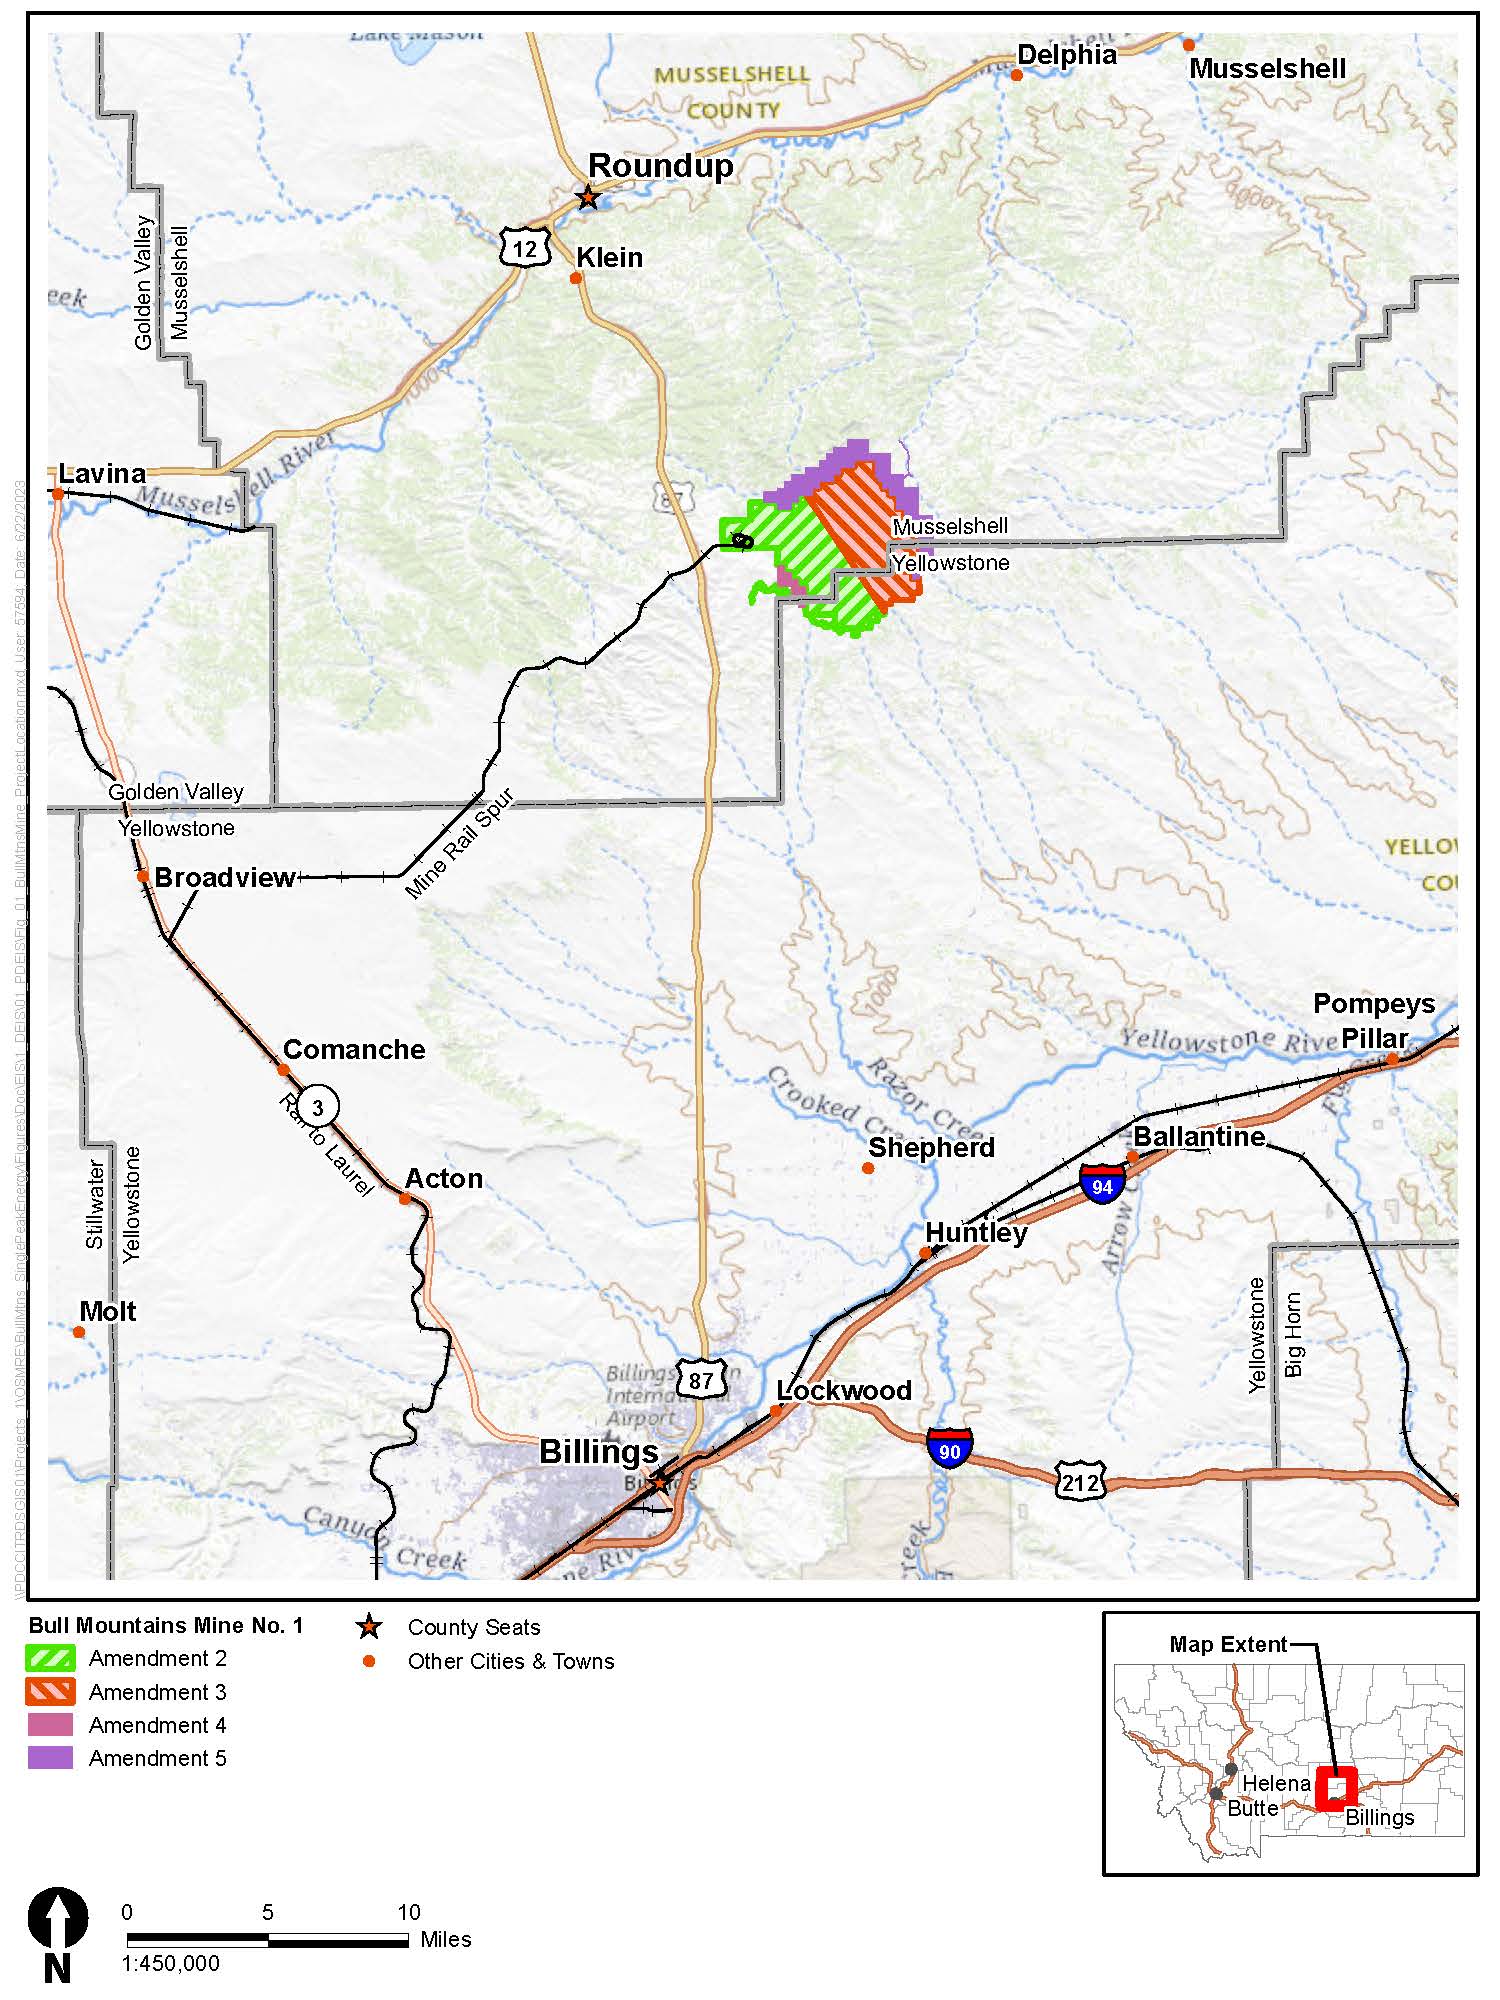 This figure shows the location of the Bull Mountains Mine No. 1 about 30 miles north of Billings, Montana. It also shows the different permit Amendments 2, 3, 4 and 5.